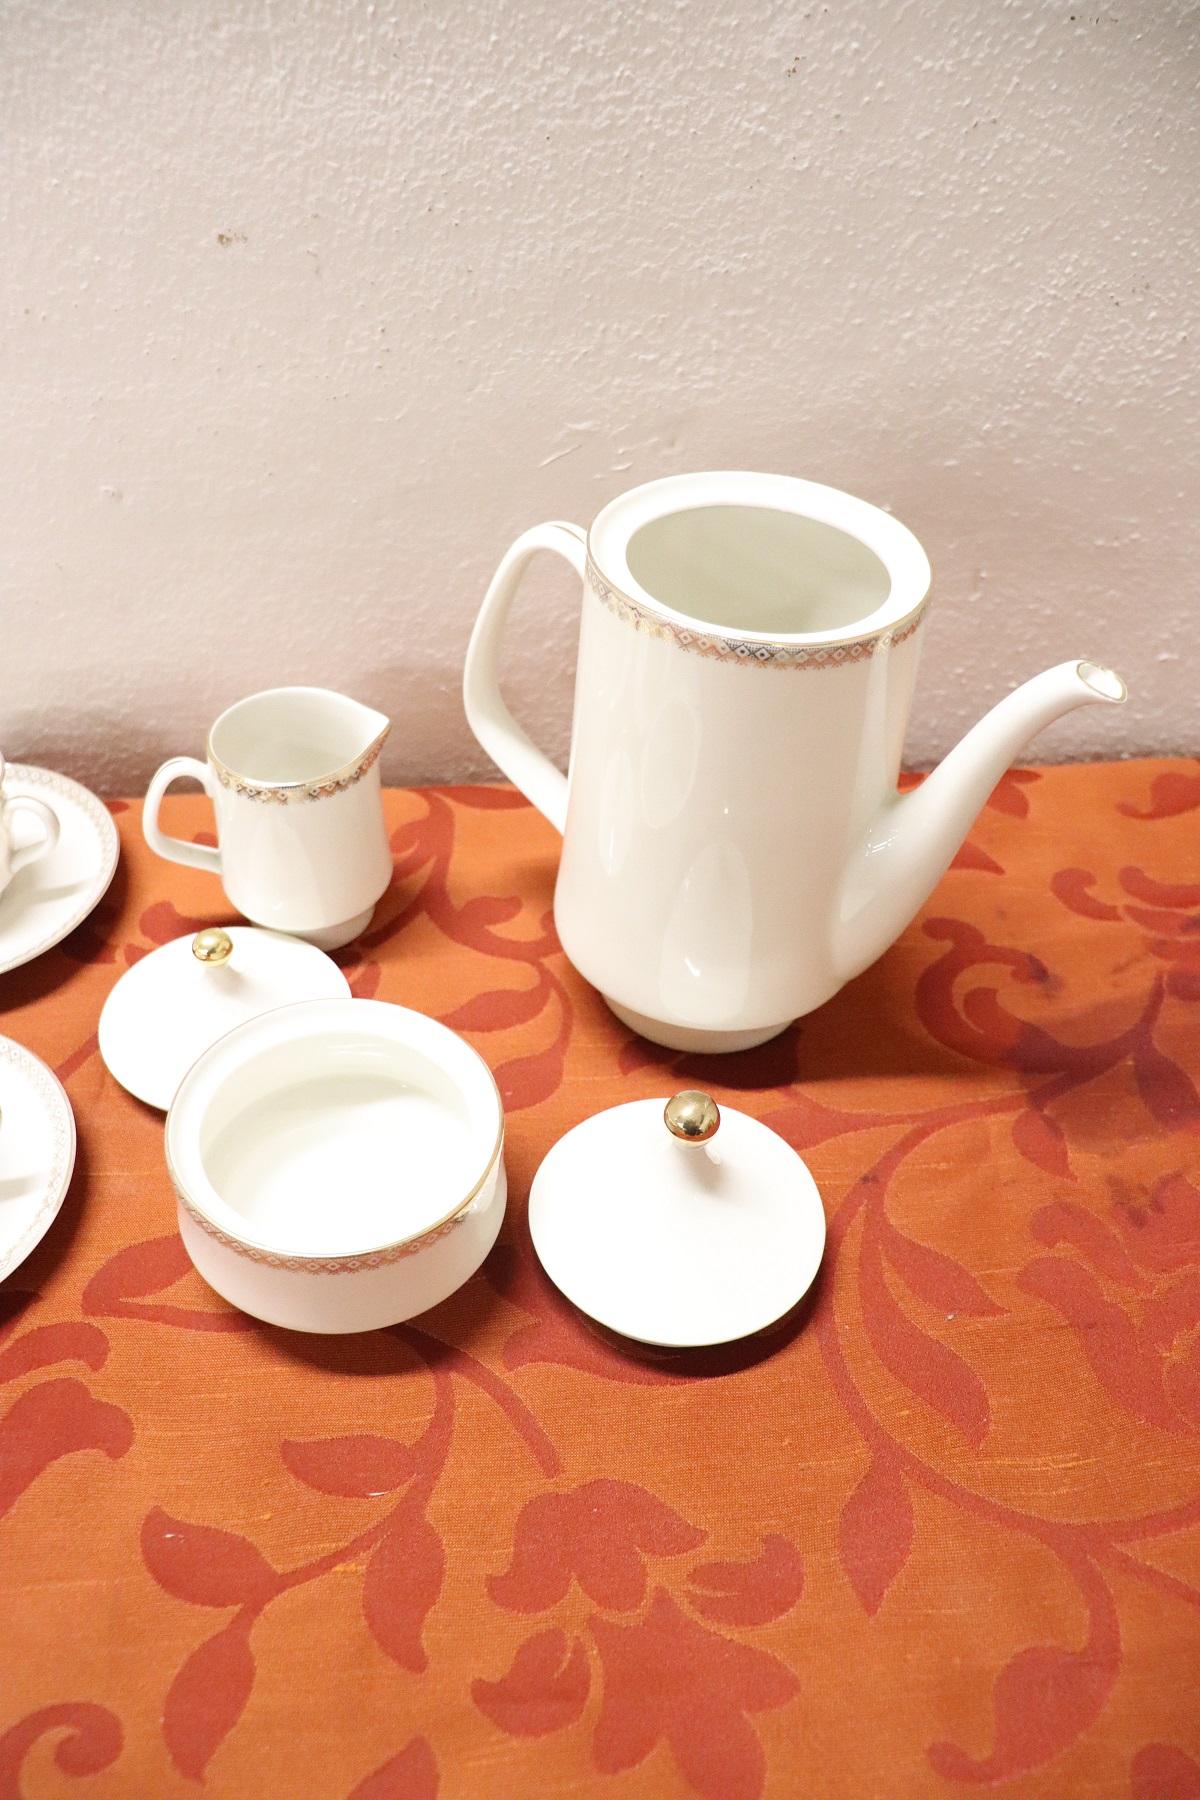 Late 20th Century German White and Gold Porcelain Coffee Set by Bavaria, 15 Pieces